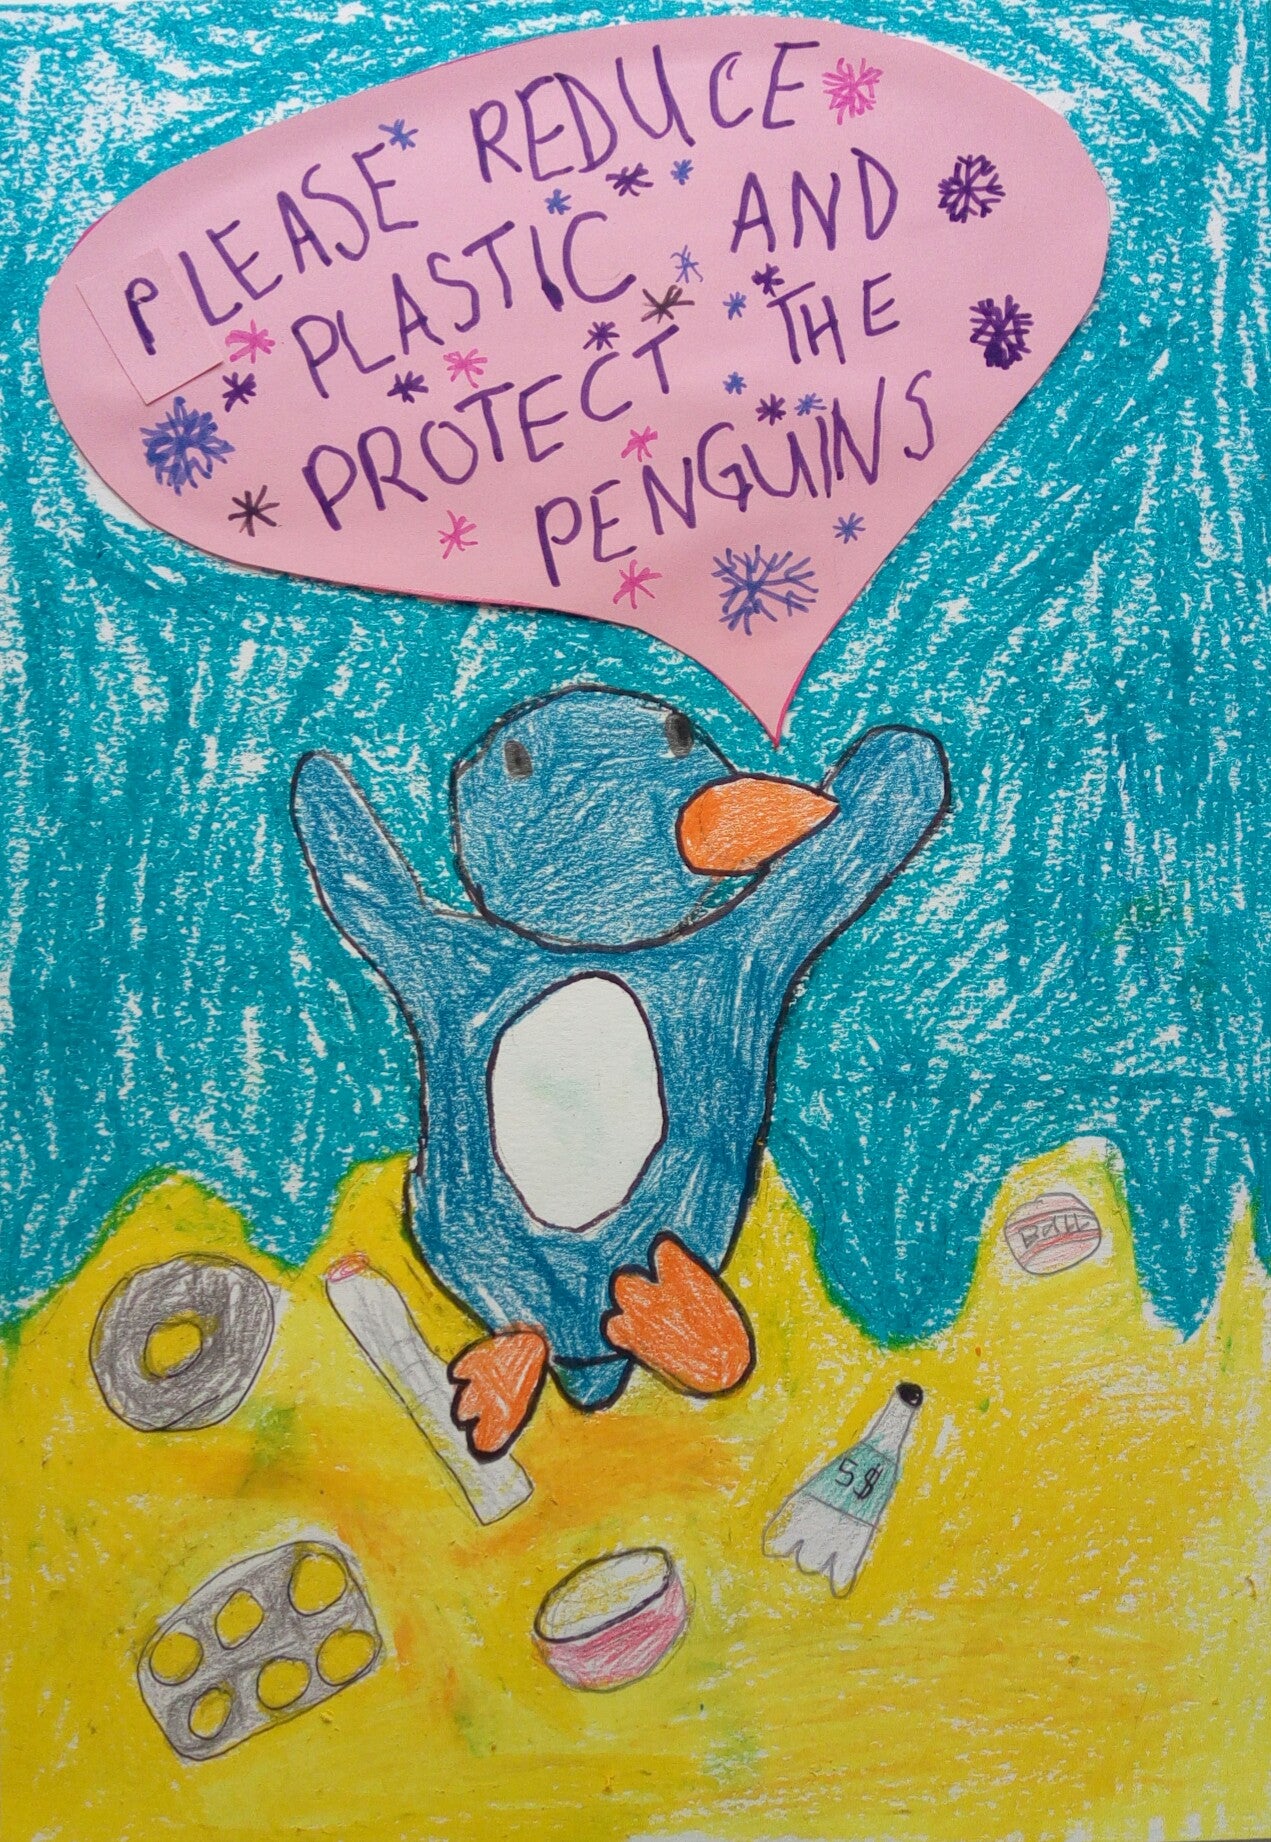 Protect the Penguins Poster: Competition winners